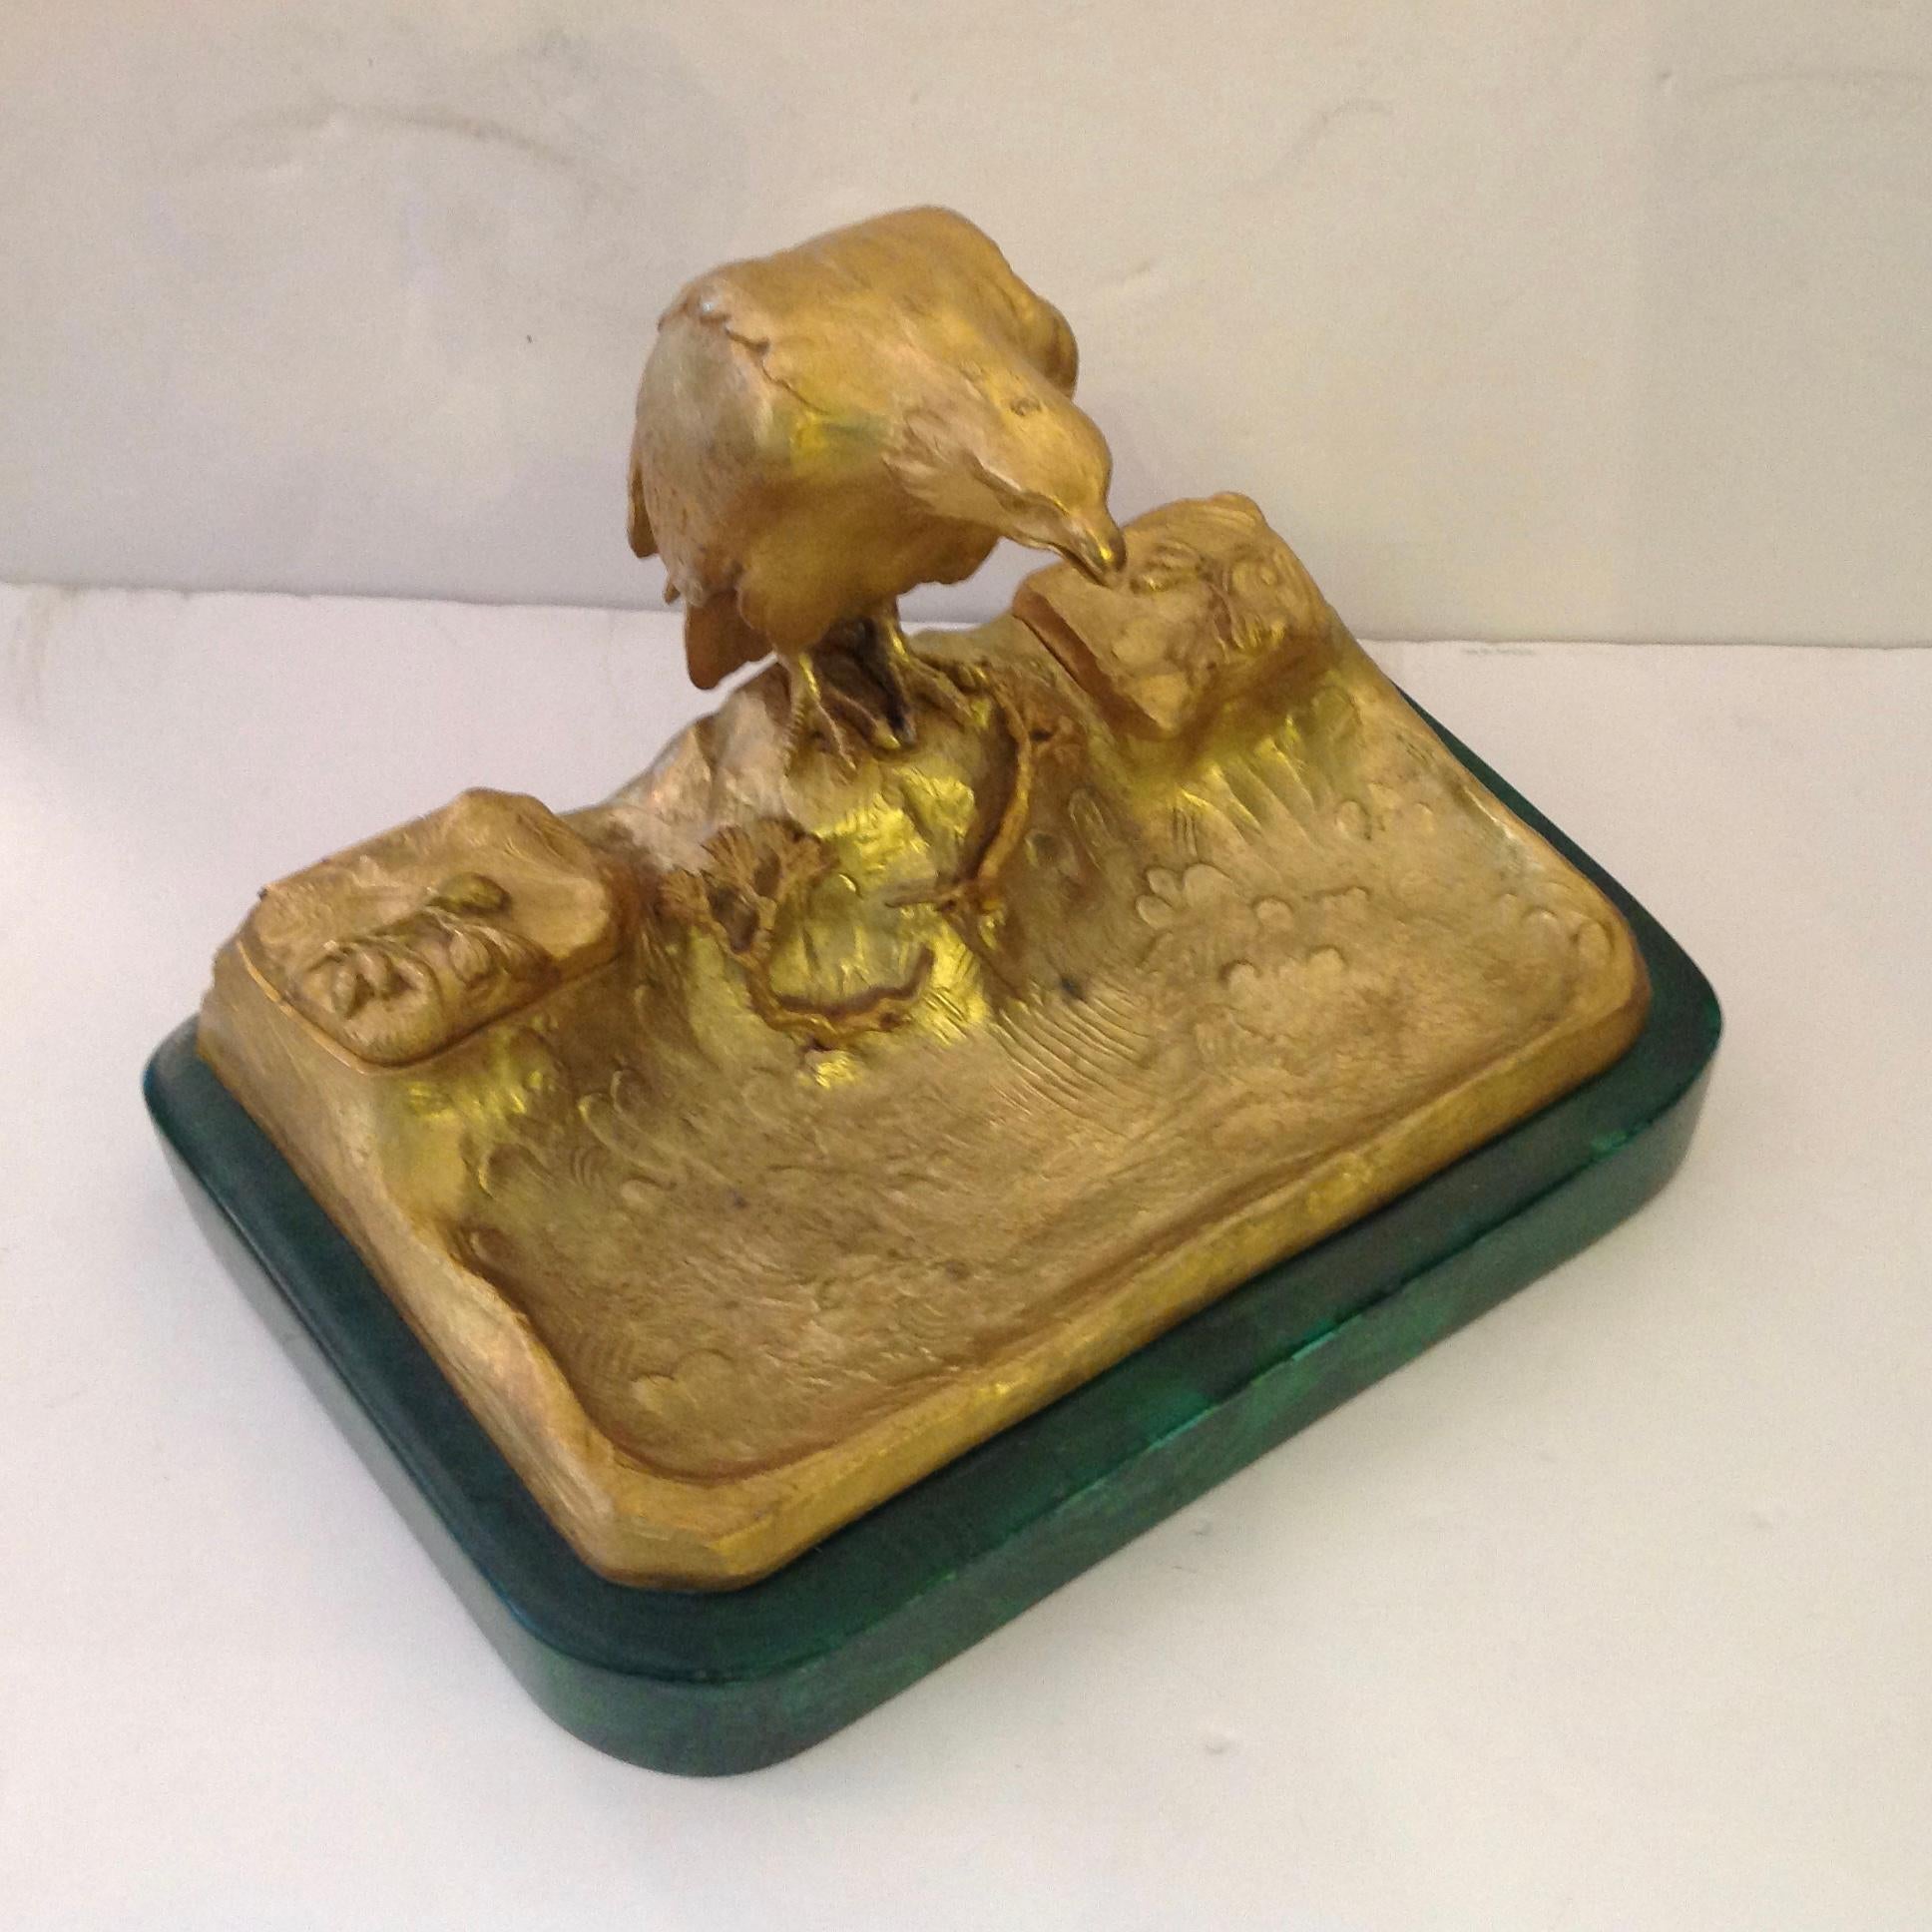 A stunning and finely cast 19th century French inkstand mounted on a malachite like base.